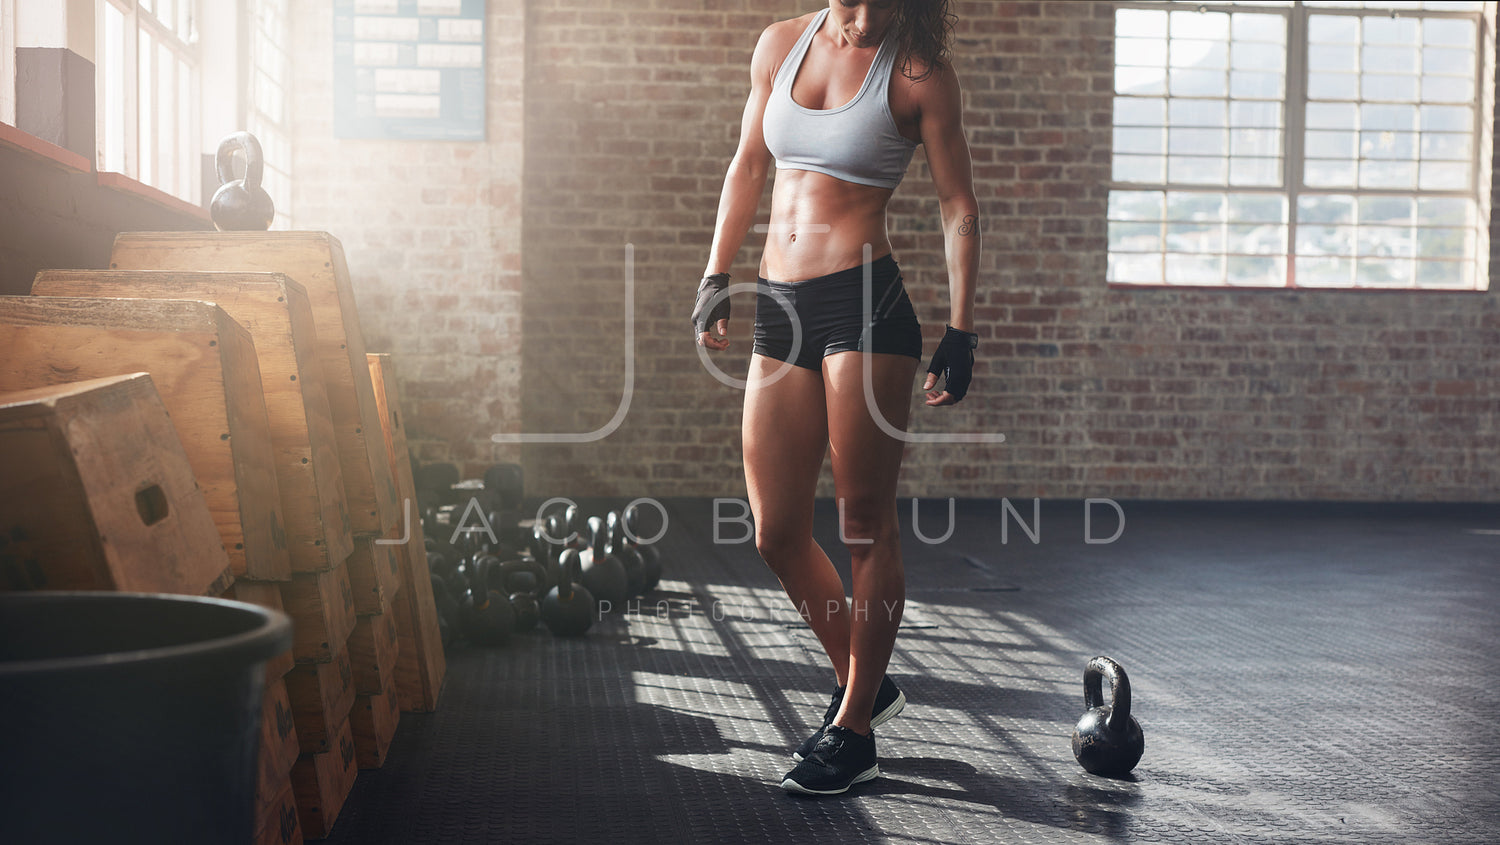 Muscular woman standing in crossfit gym – Jacob Lund Photography